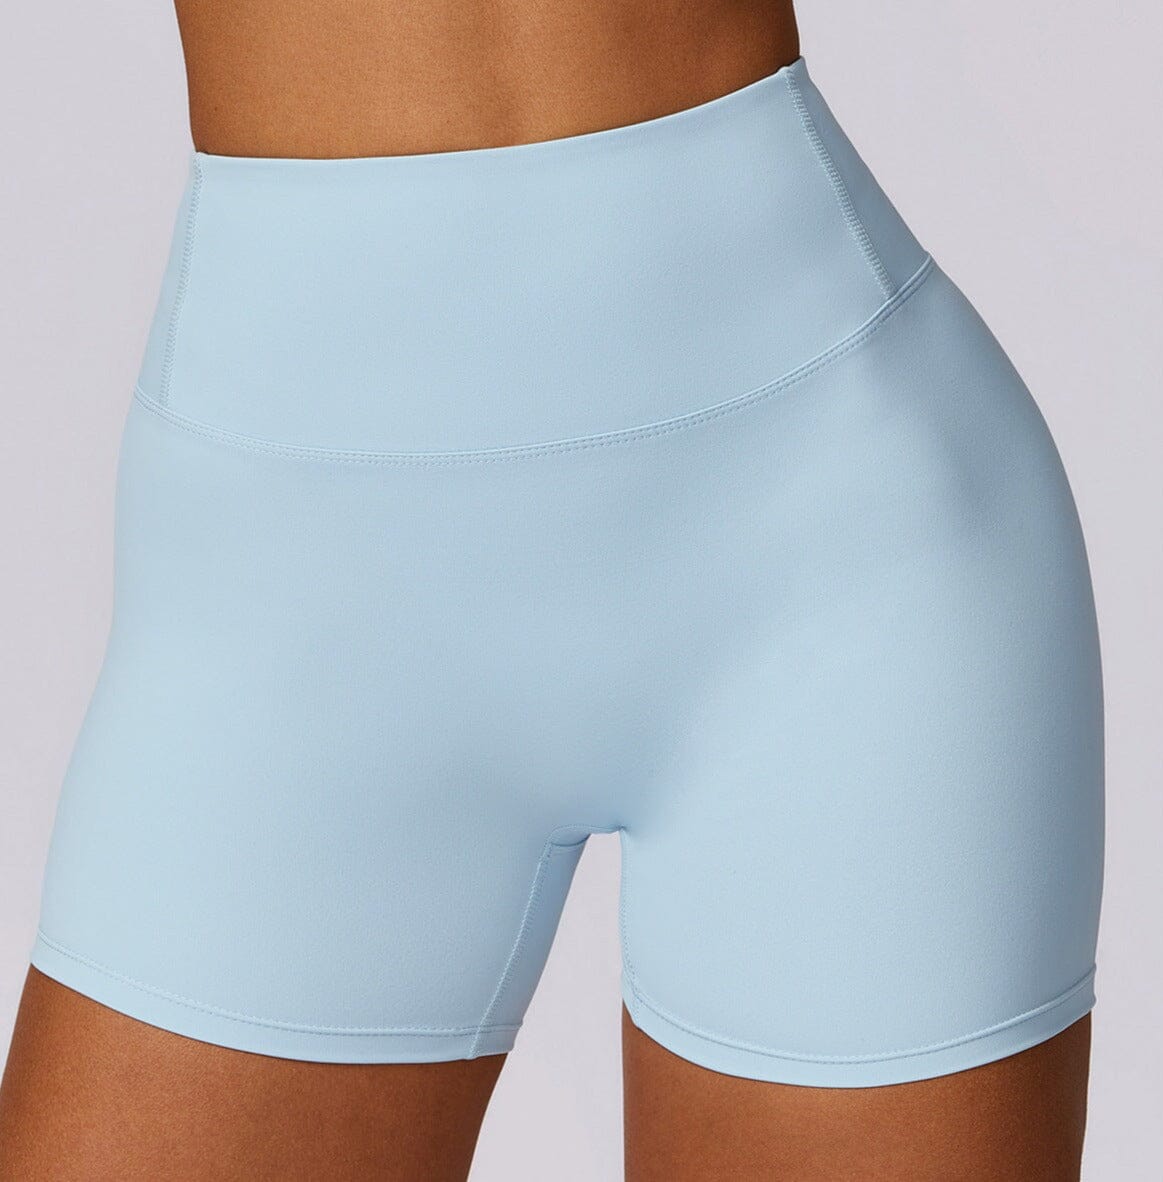 Movers Scrunch Shorts Shorts Starlethics Sky Blue S 